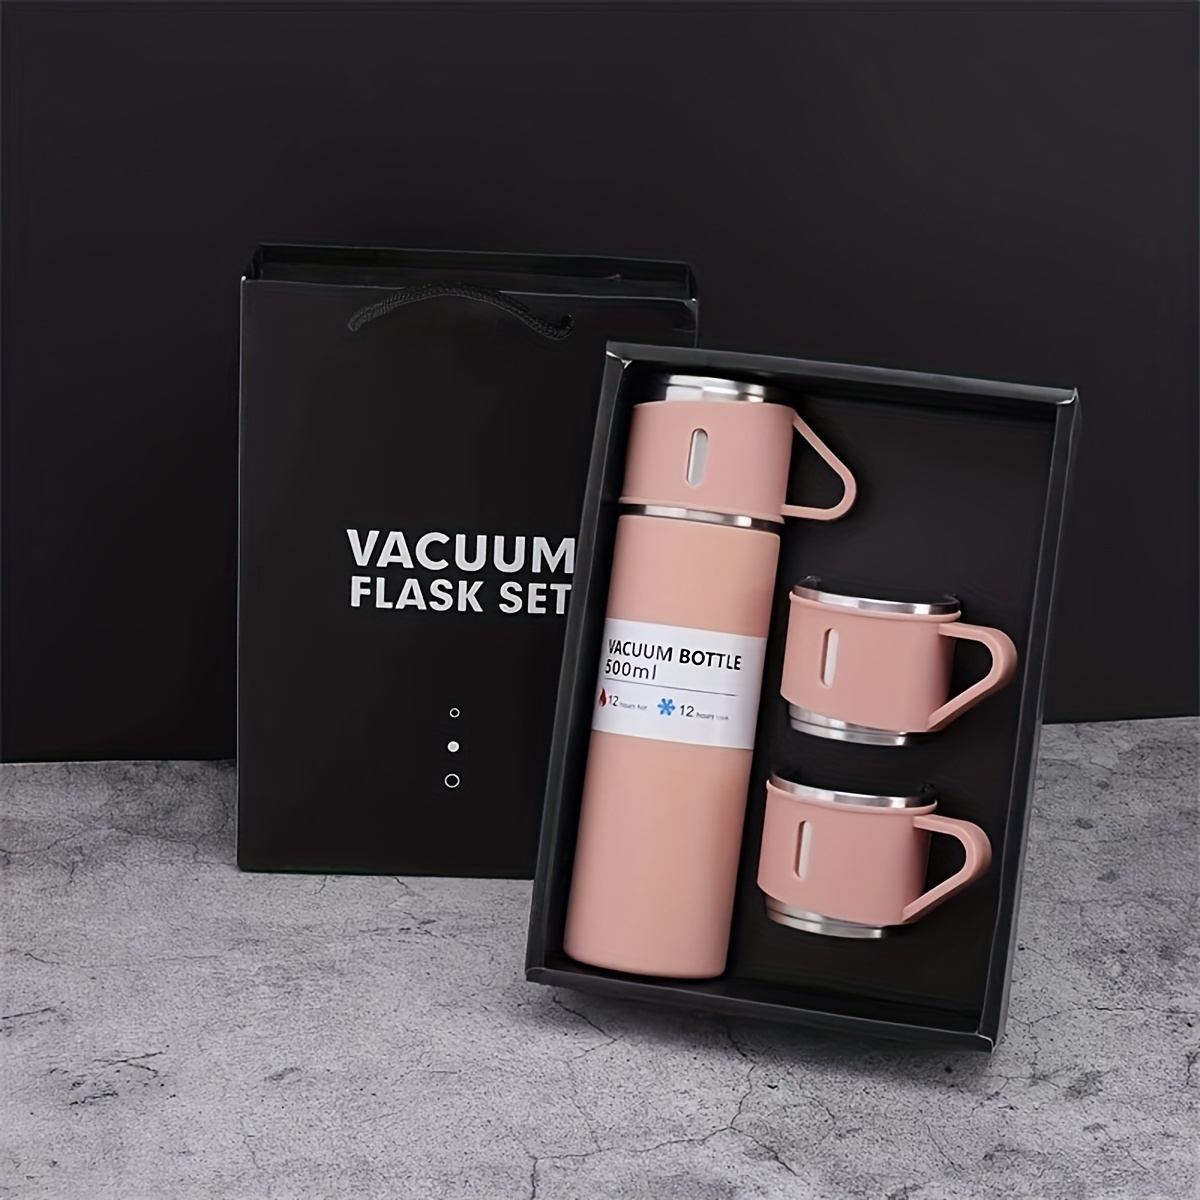 Mini Water Bottle 10.8oz/320ml Travel Coffee Mug with Handle Thermos for  Hot and Cold Drinks Insulated Tumblers for Women Vacuum Sealed Flask Pink